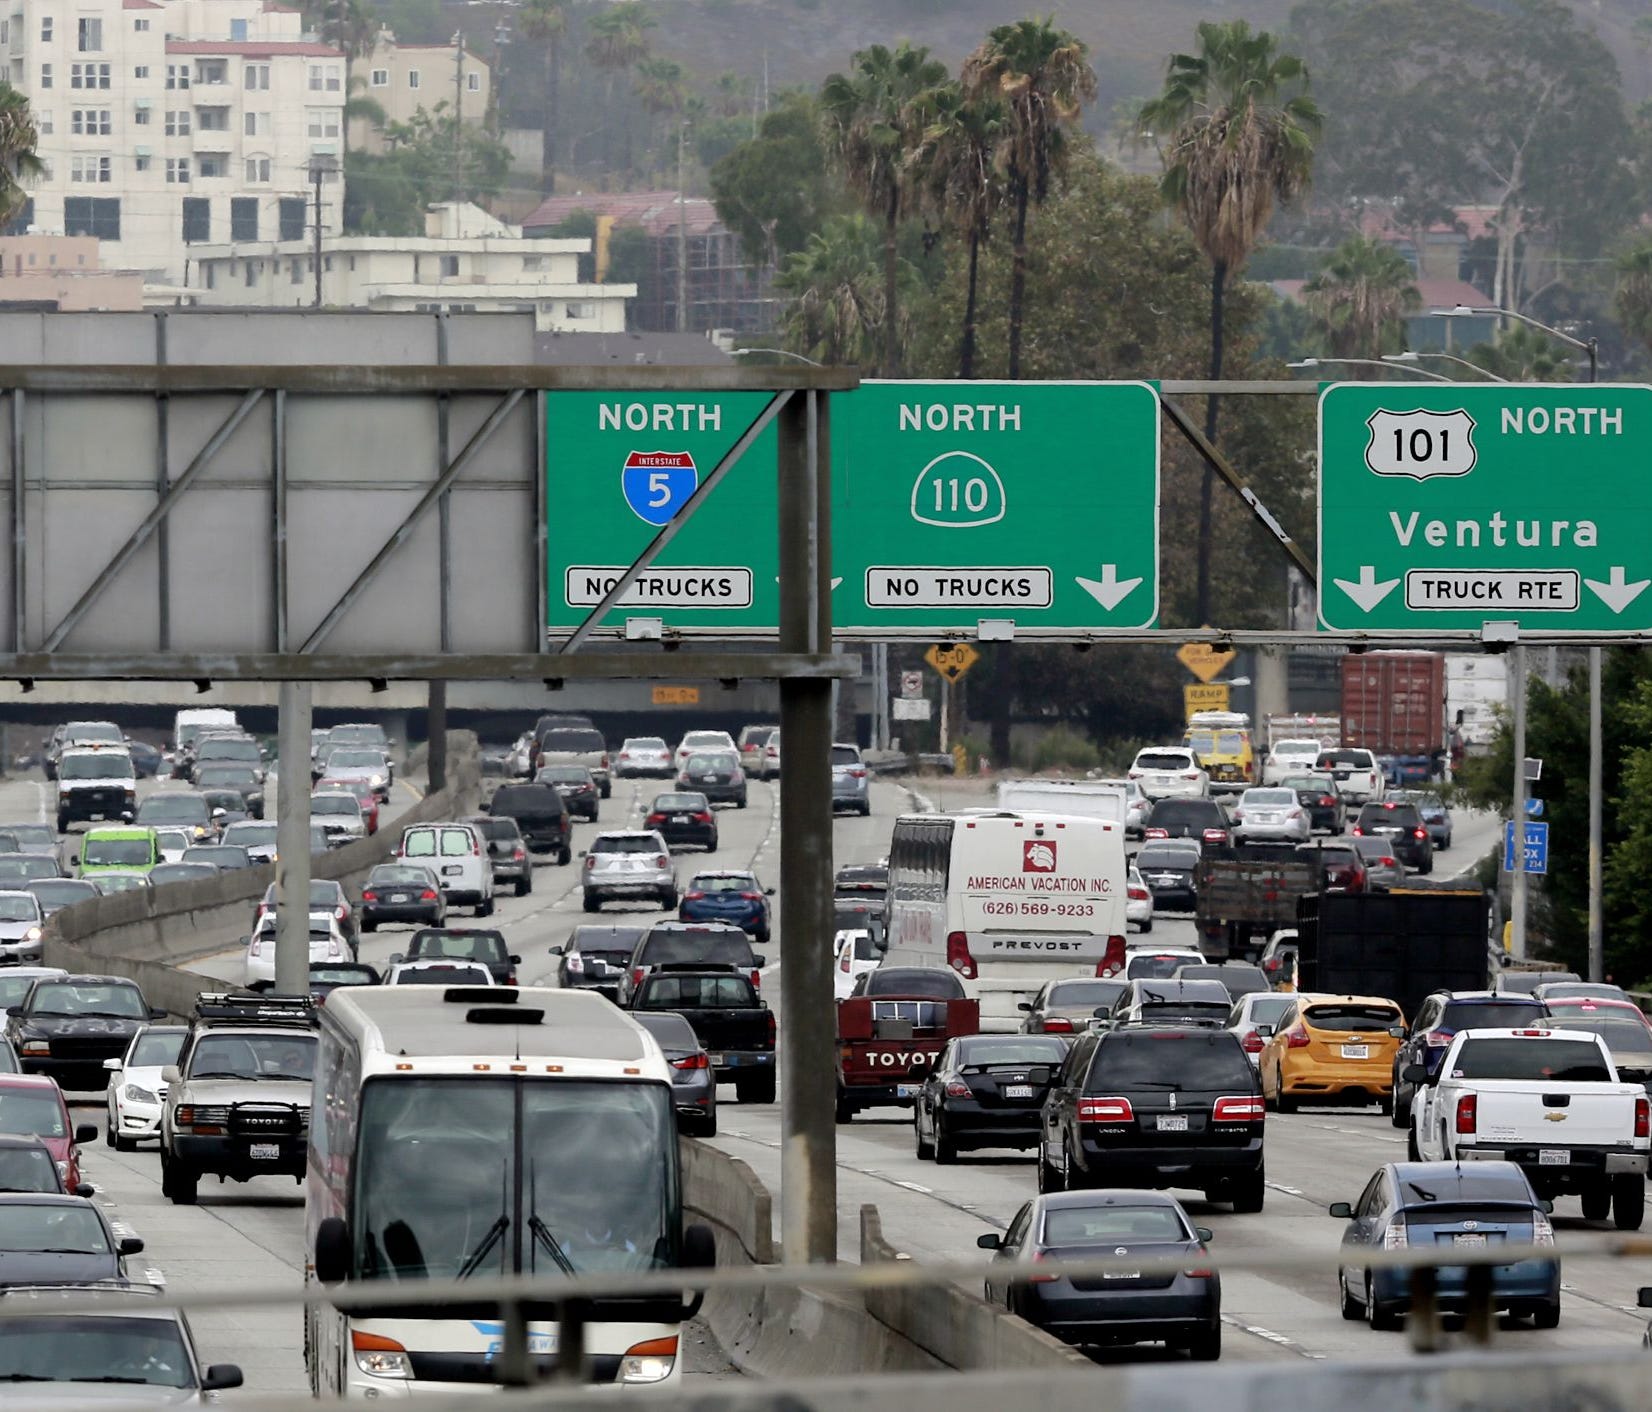 File photo taken in 2015 shows traffic tie-up as vehicles  enter the US 101 Ventura Freeway in Los Angeles as traffic from US 101 enters the California city's downtown area.